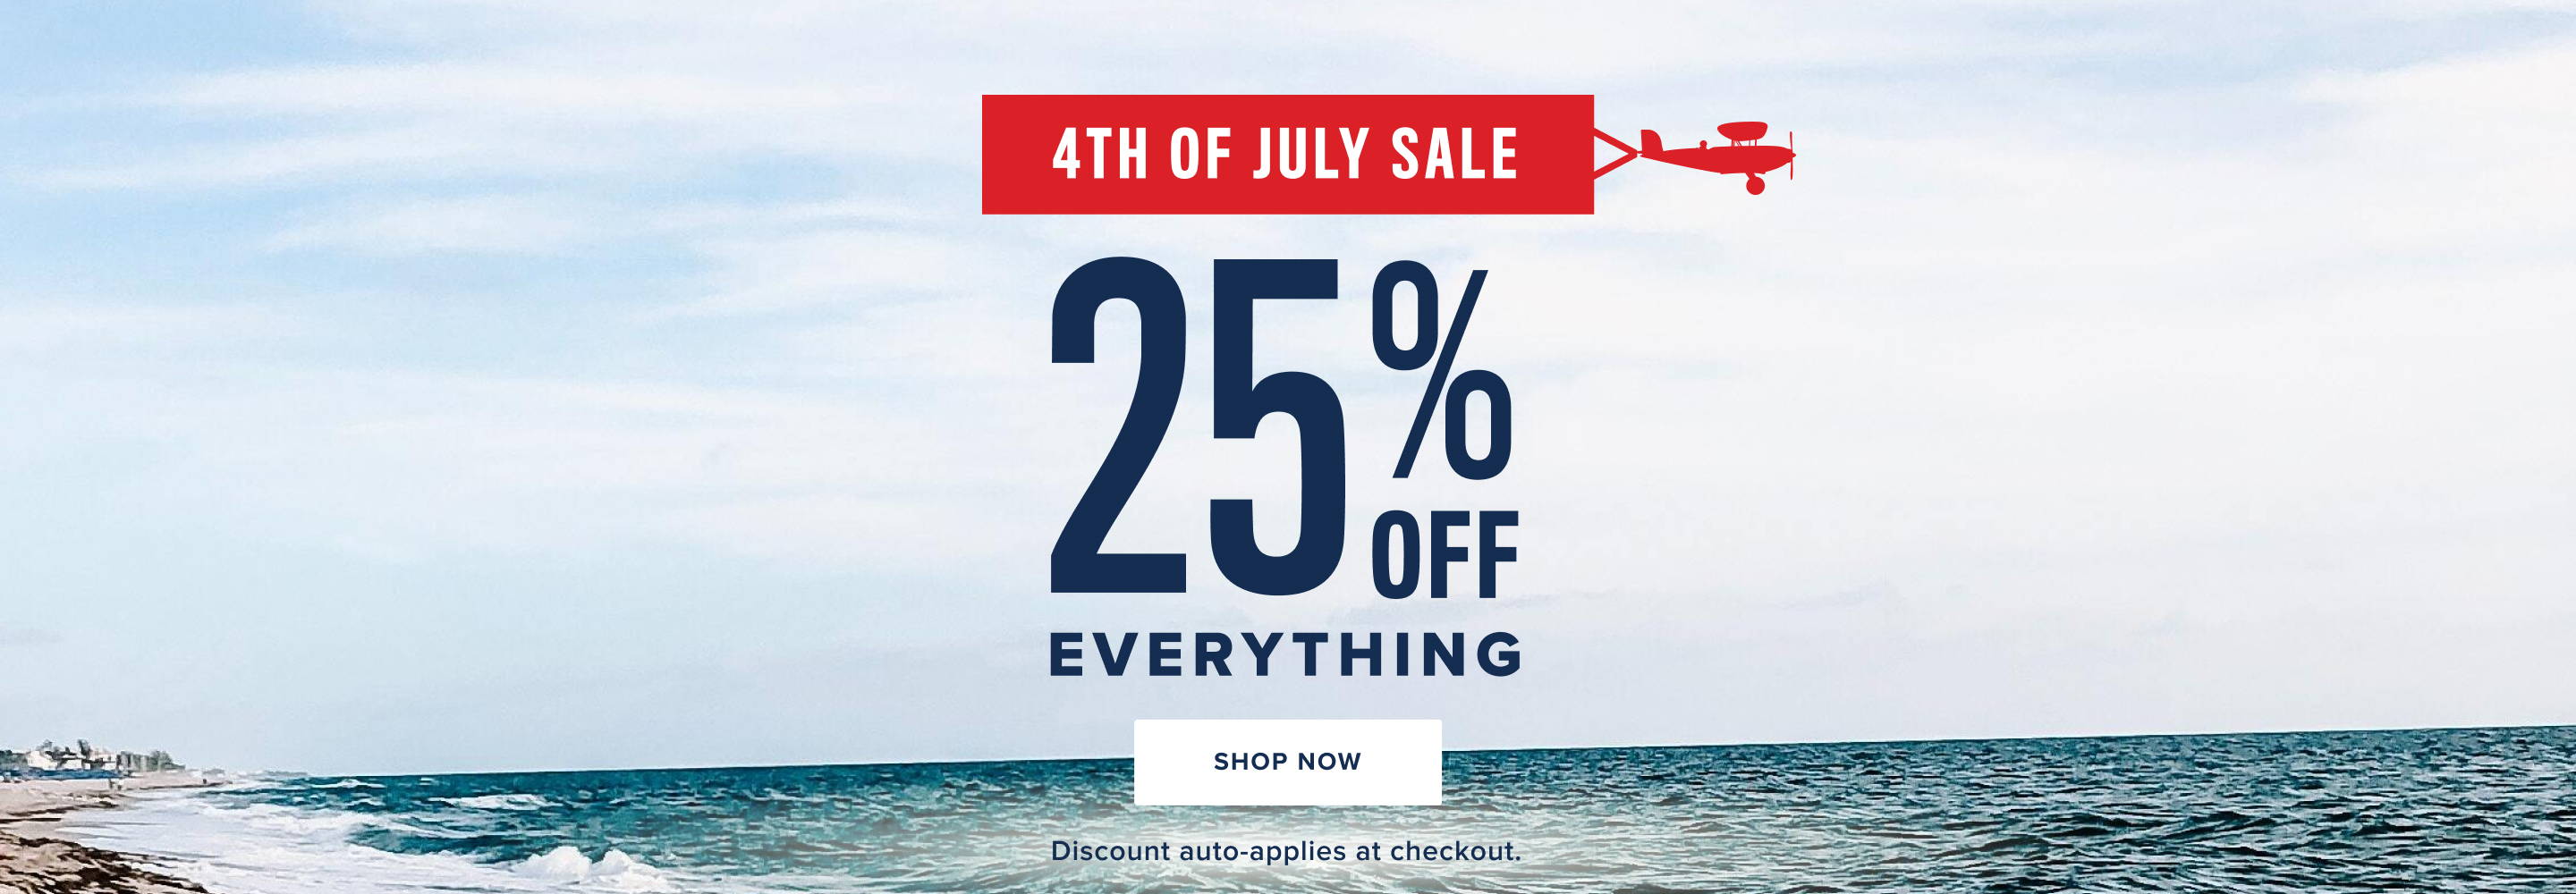 4th of July Sale 25% off everything. 